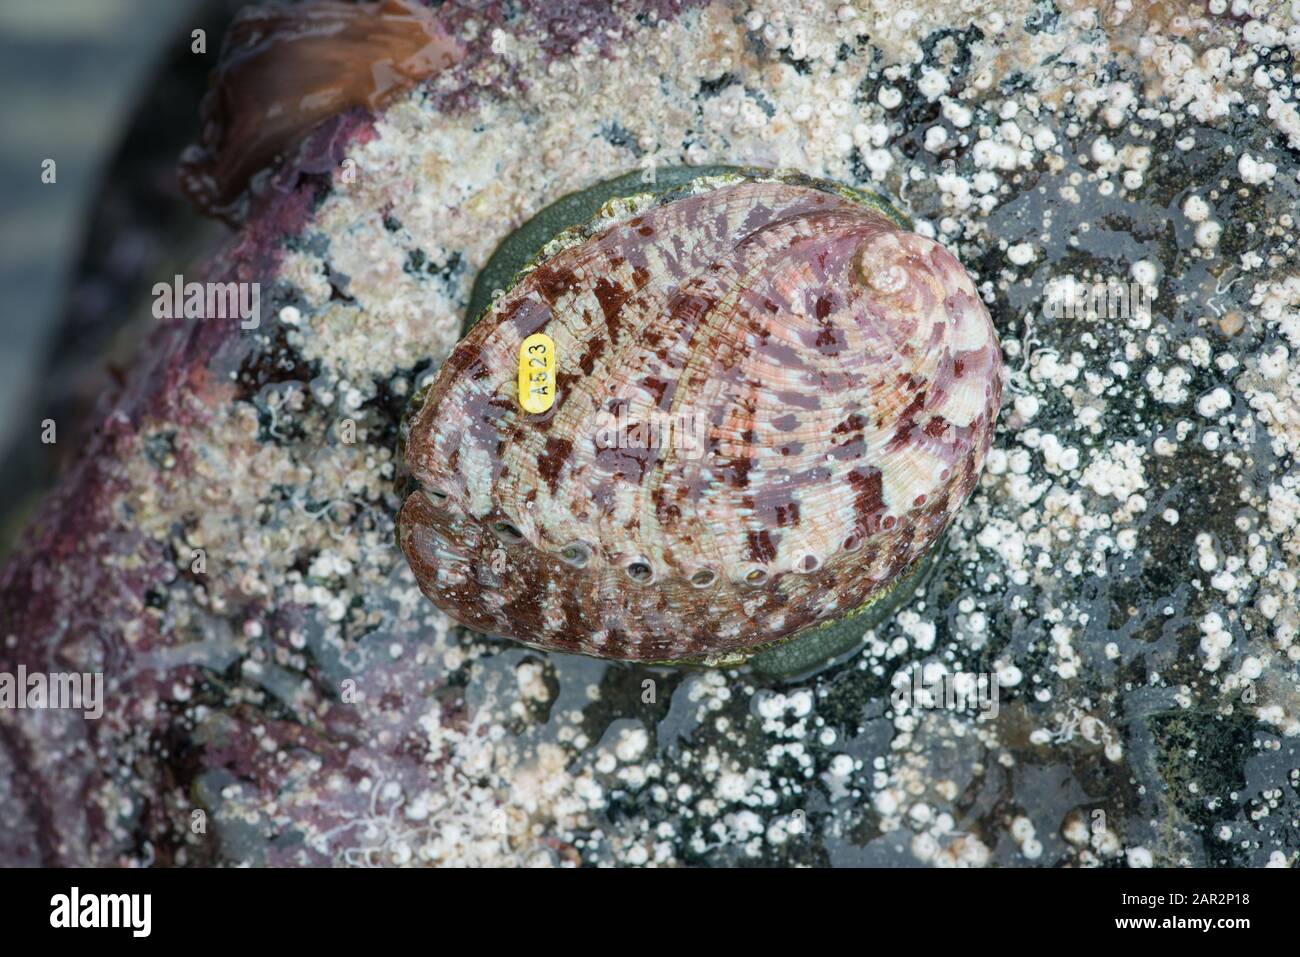 A green ormer (Haliotis tuberculata) with tag attached as part of stock monitoring research. Guernsey, Channel Islands, NE Atlantic. Stock Photo